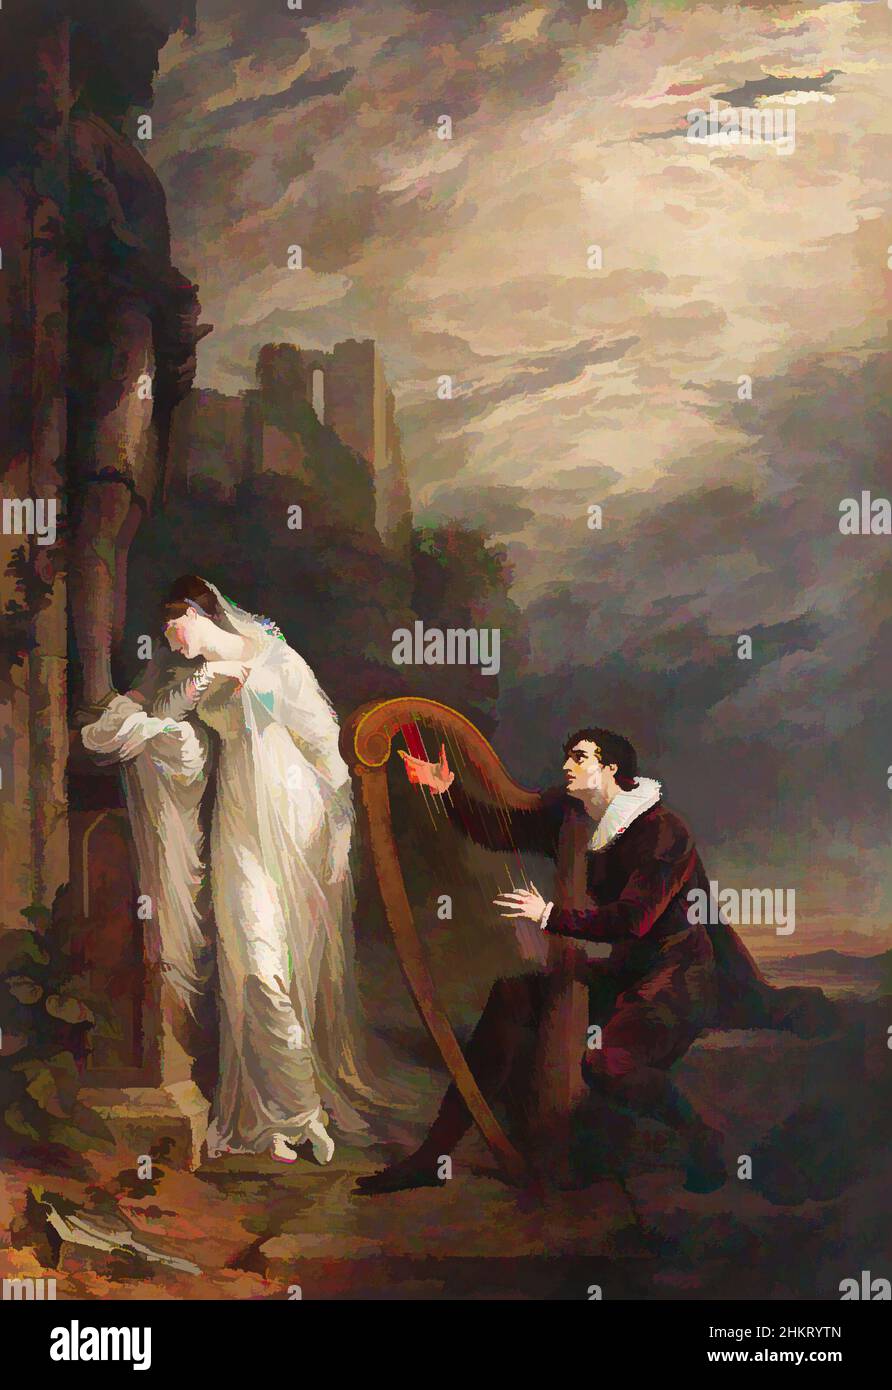 Art inspired by Genevieve. (from a poem by S.T. Coleridge entitled 'Love'), George Dawe, 1812, George Dawe's painting Genevieve is a large-scale masterpiece of what art historians have termed 'Romantic classicism', highly fashionable in the early 19th century. It pulls out all the stops, Classic works modernized by Artotop with a splash of modernity. Shapes, color and value, eye-catching visual impact on art. Emotions through freedom of artworks in a contemporary way. A timeless message pursuing a wildly creative new direction. Artists turning to the digital medium and creating the Artotop NFT Stock Photo